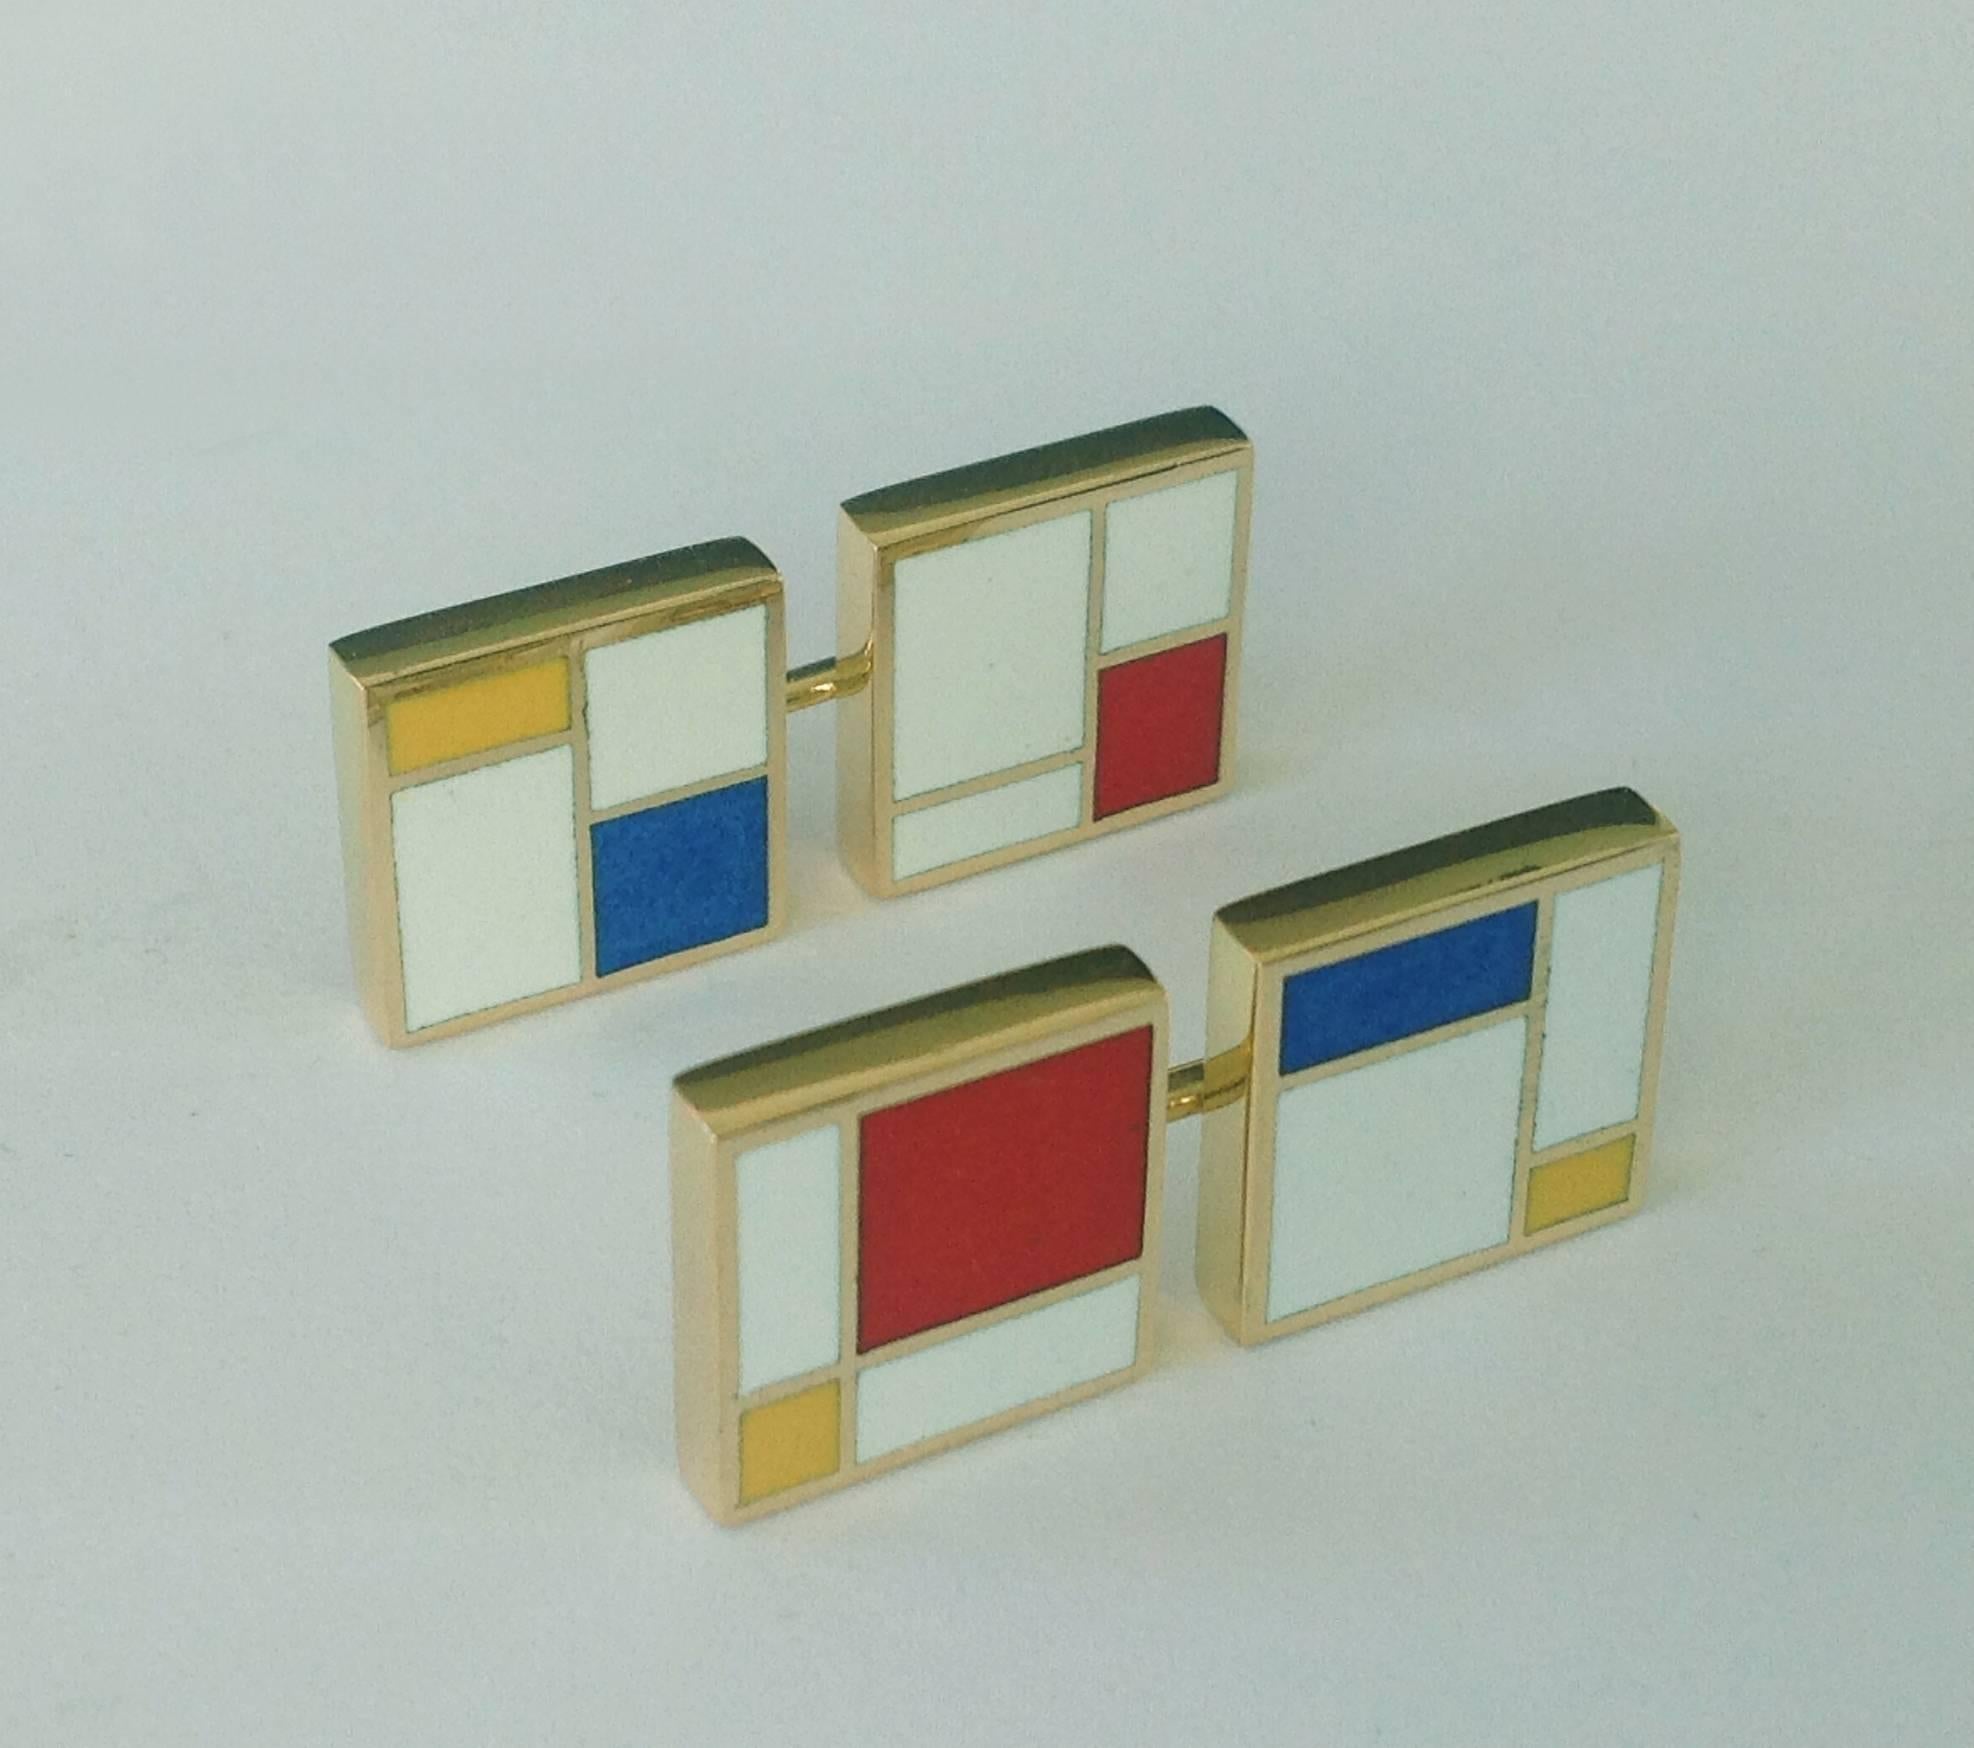 Dalben design fire Enamel and 18 k yellow gold cufflinks inspired by Mondrian paintings.
Dimensions:  0,5 x 0,5 in (12,8 x 12,8 mm)
The cufflinks have been designed and handcrafted in our atelier in Como Italy with a rigorous quality workmanship .